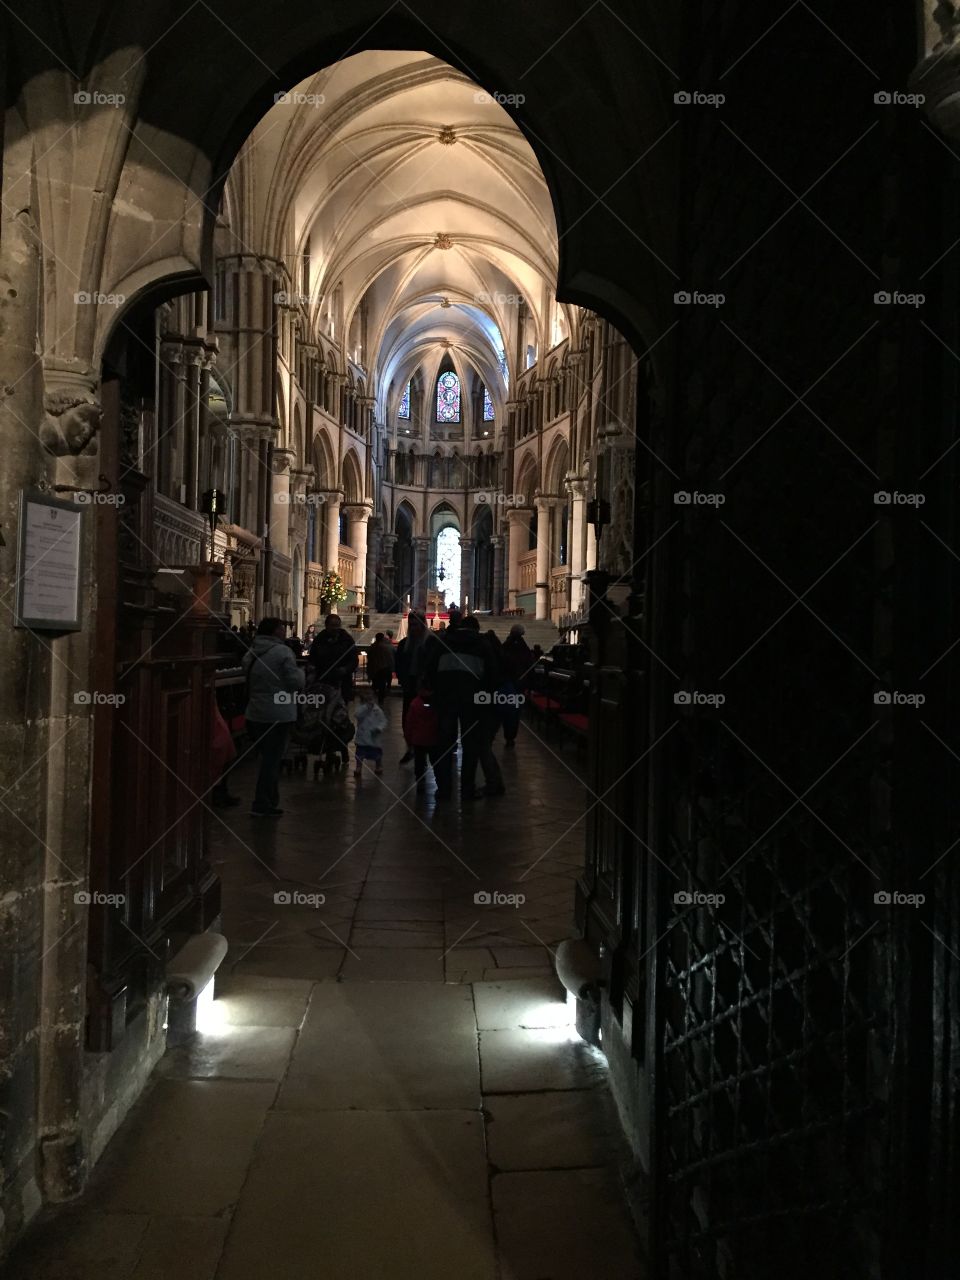 A beautiful cathedral from inside